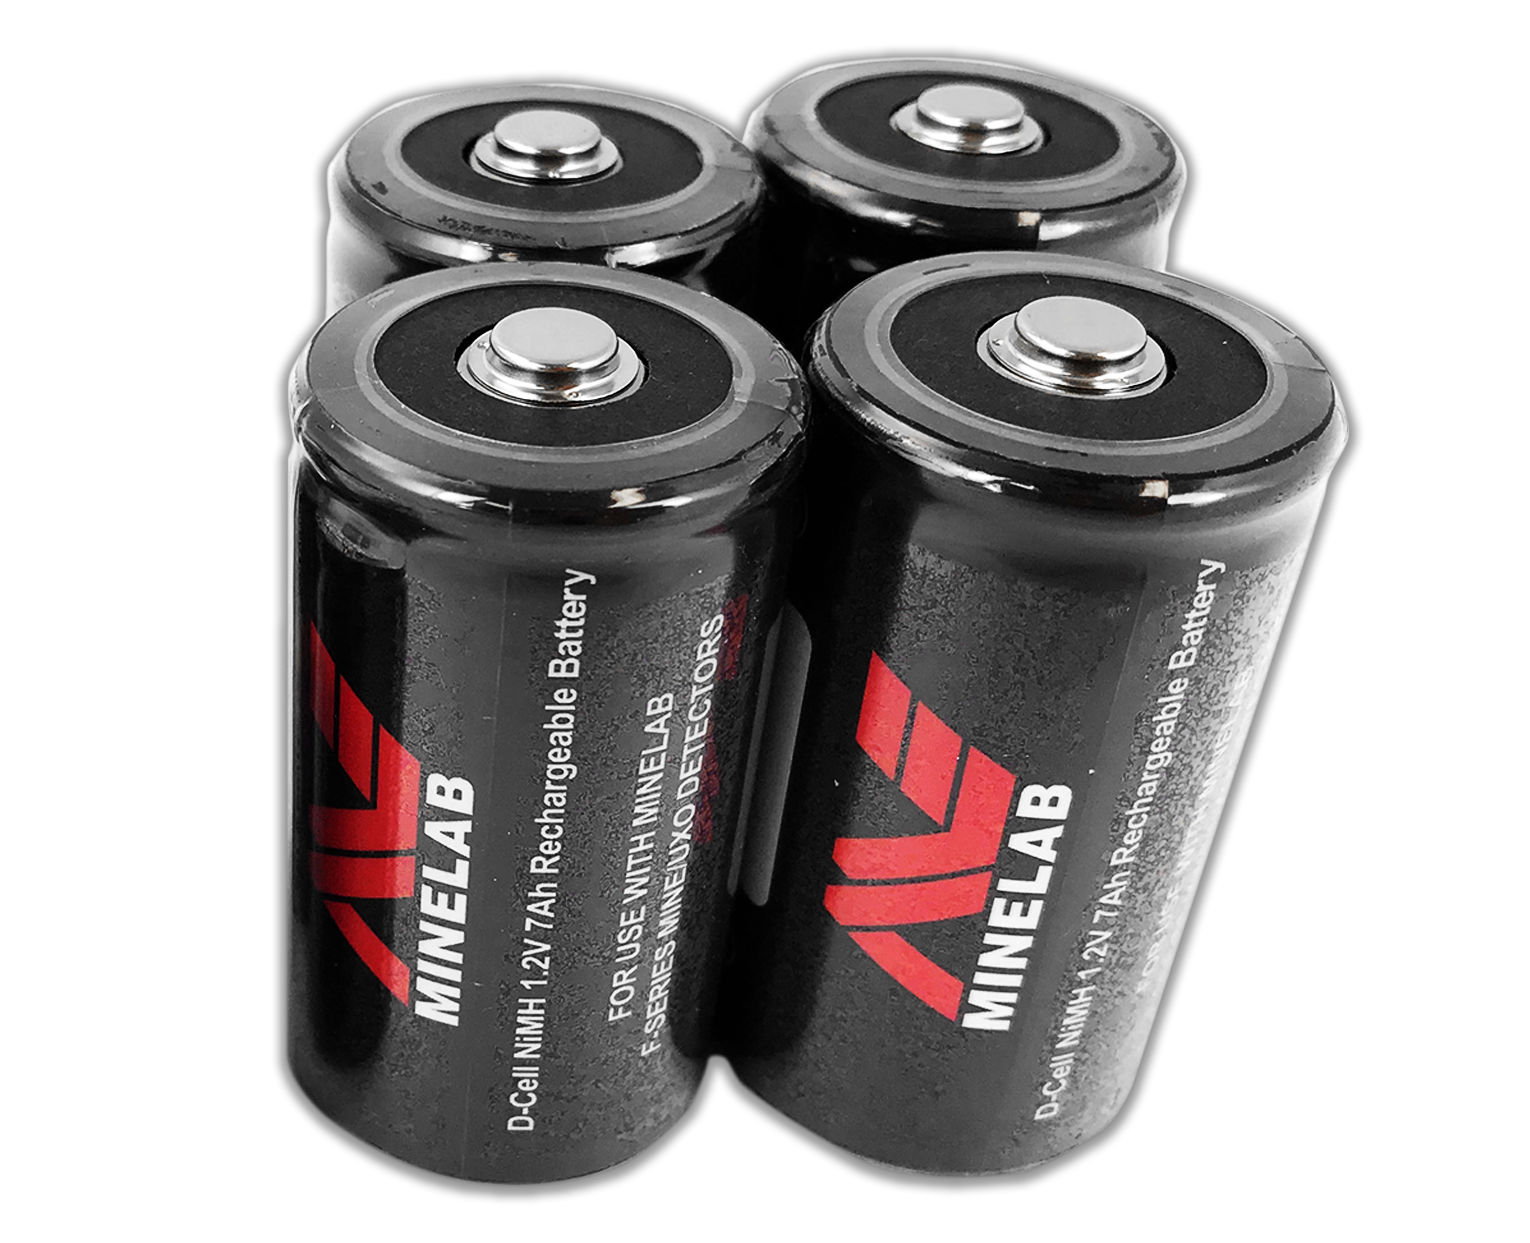 Battery D cell Rechargeable NiMH 1.2v 7a - Countermine Accessory